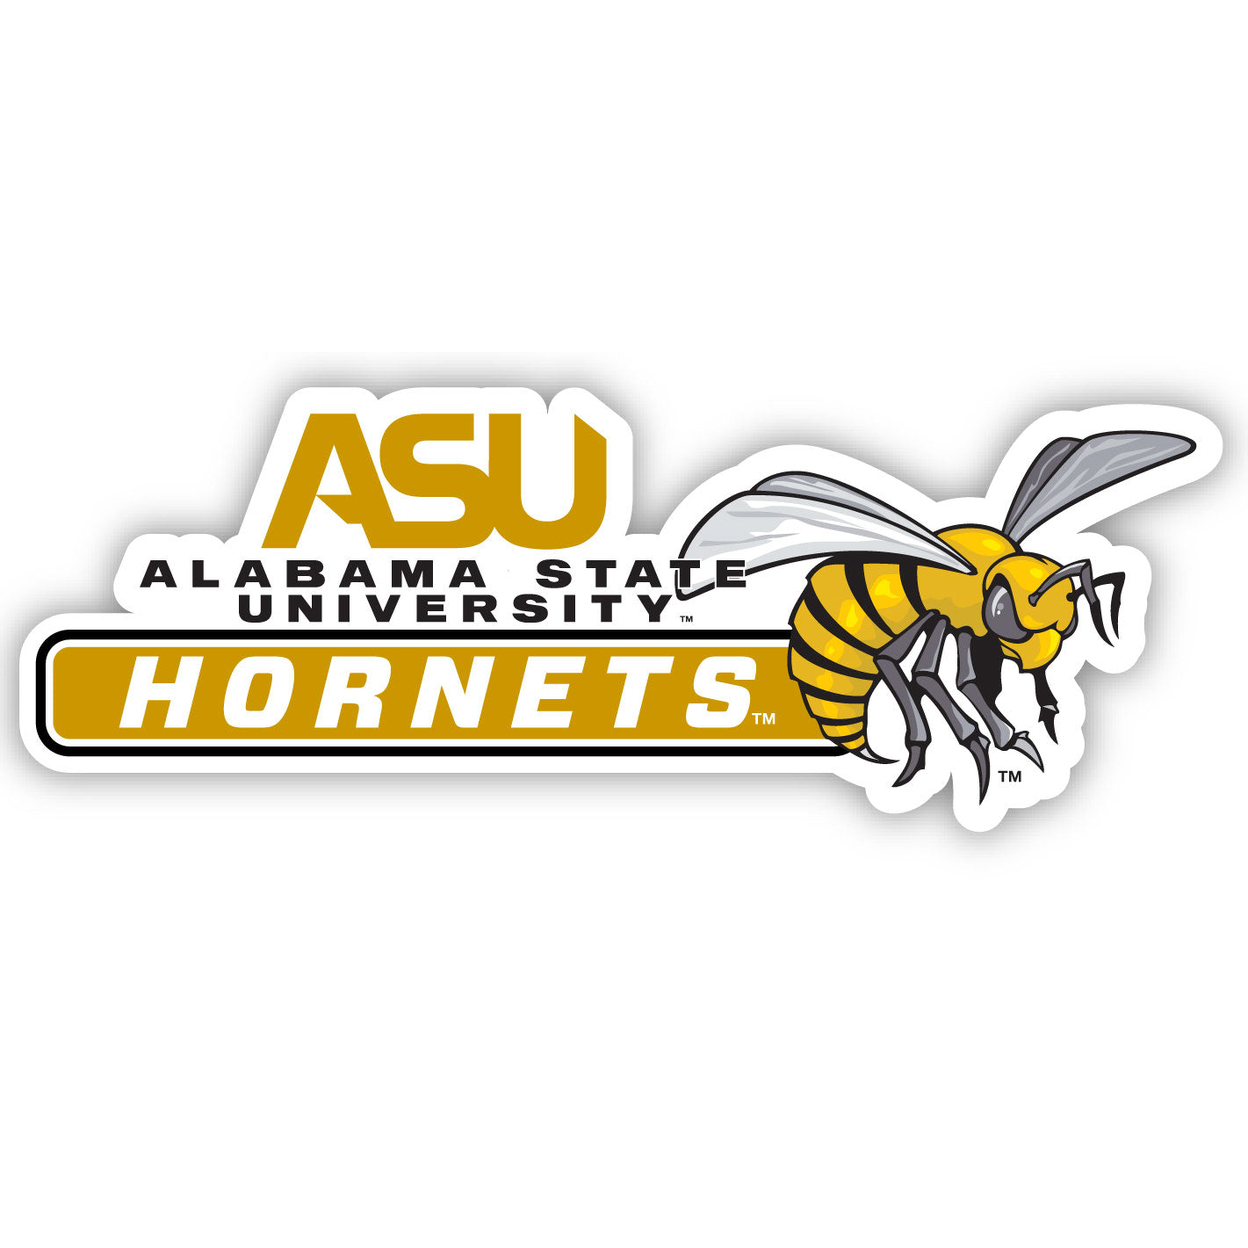 Alabama State University 4 Inch Wide Colorful Vinyl Decal Sticker